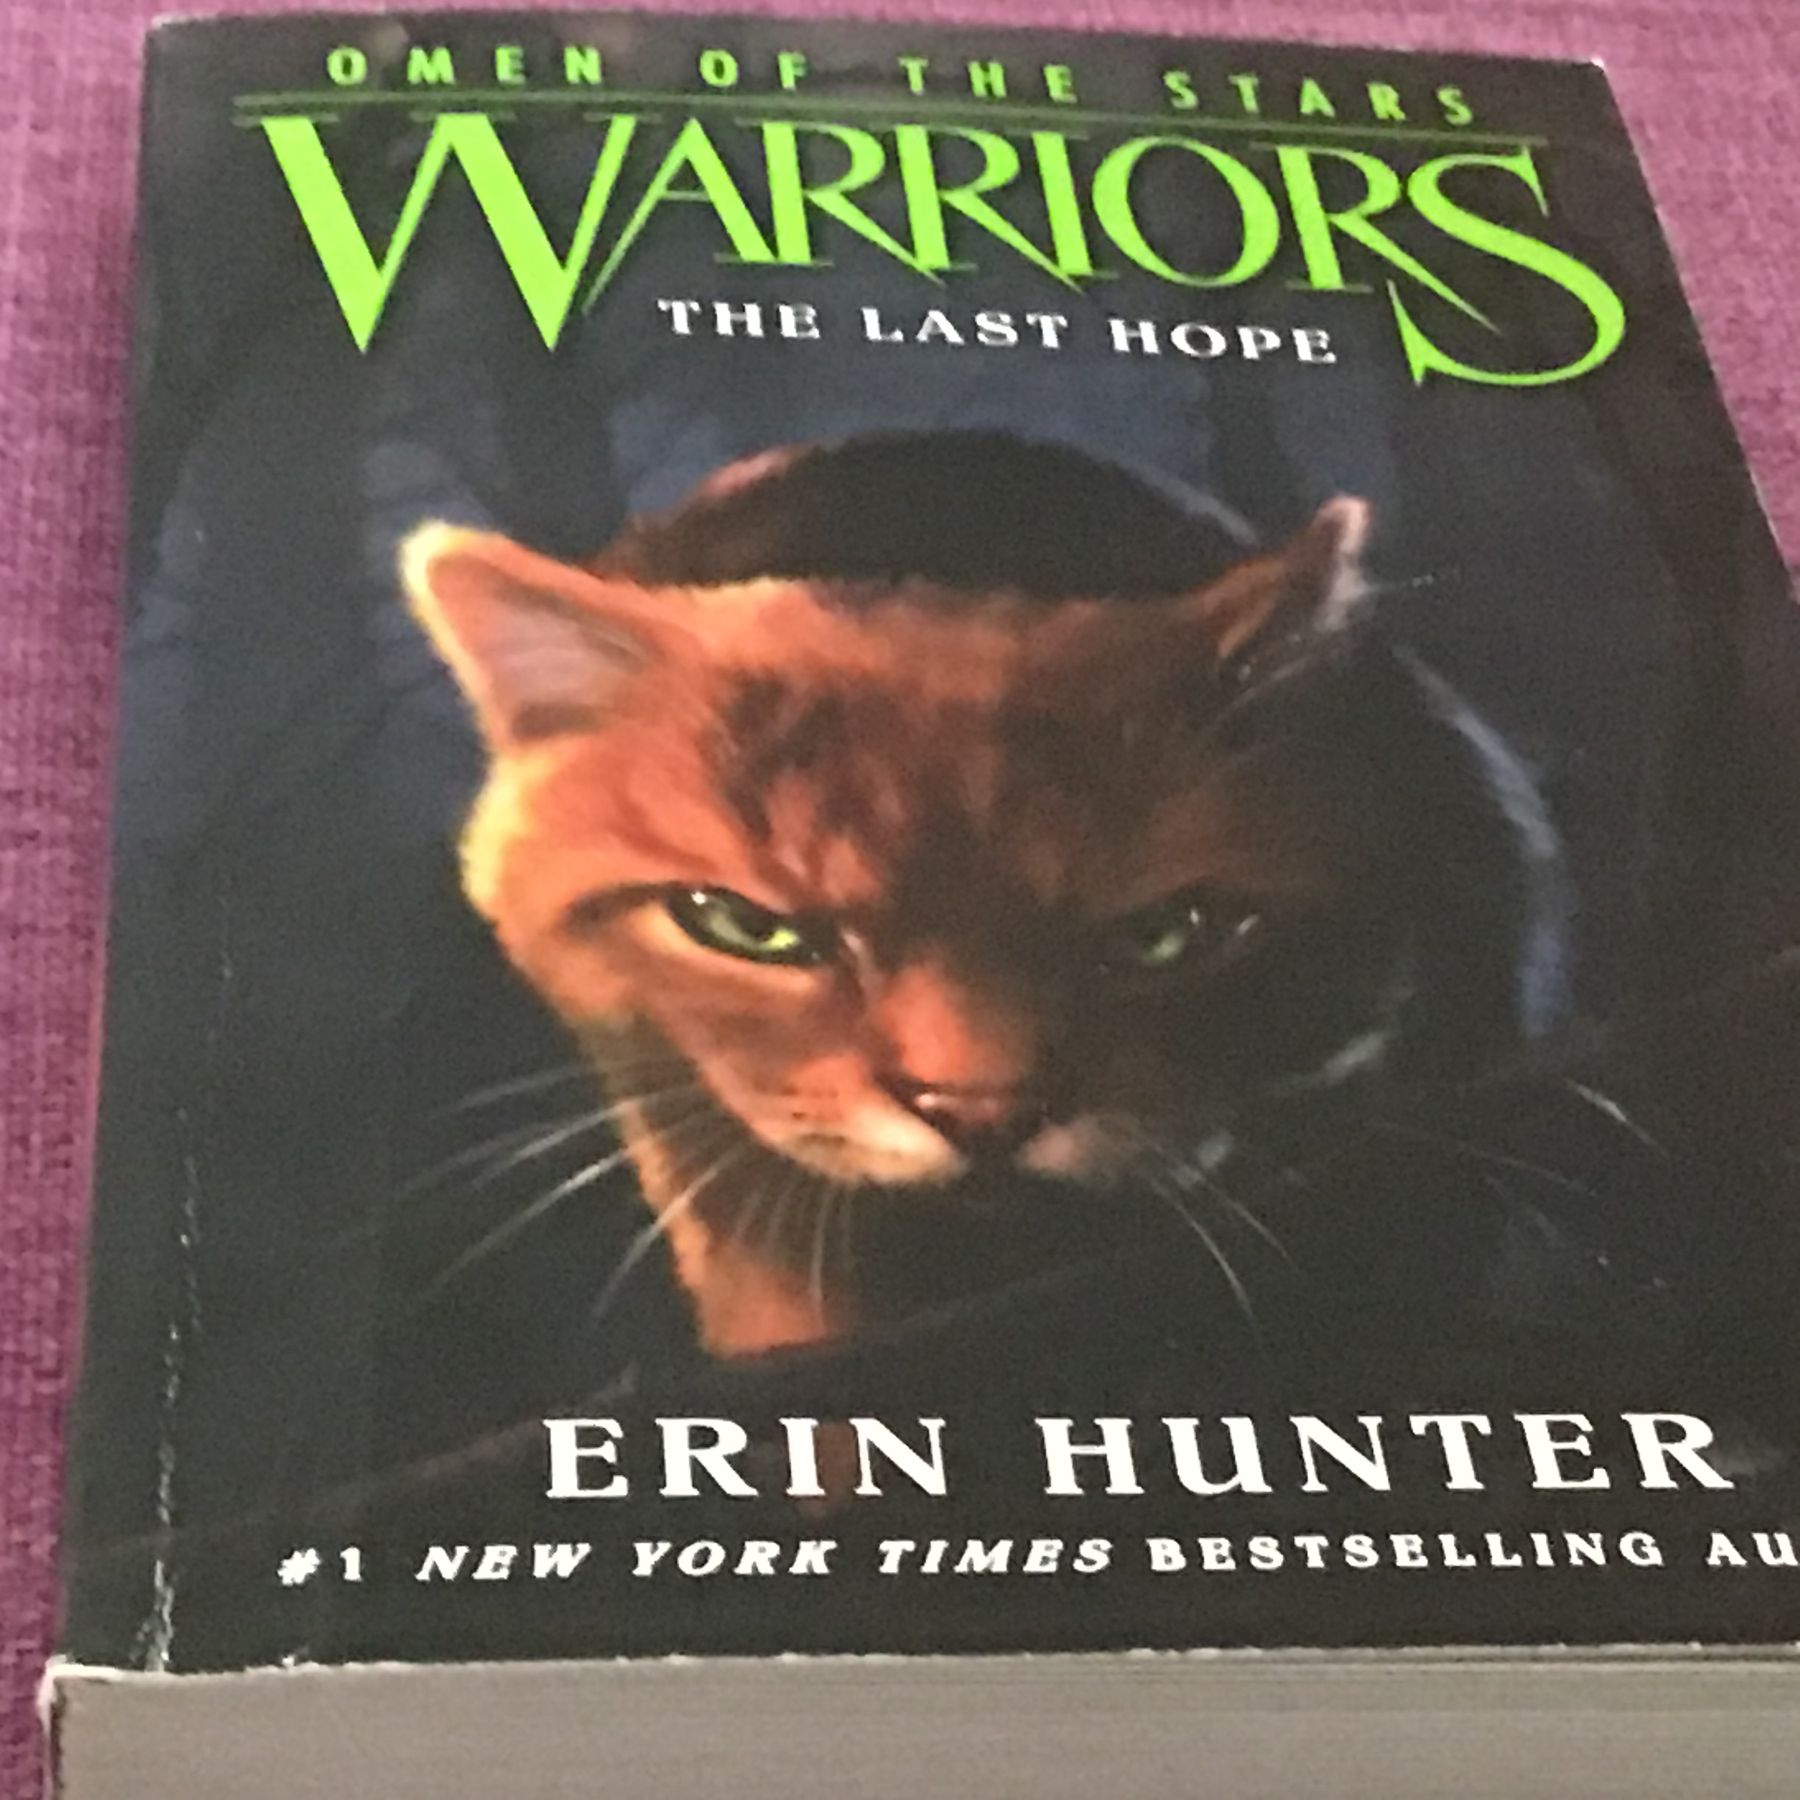 WarriorCatsFanBlog – This site is a blog about Warrior cats, a